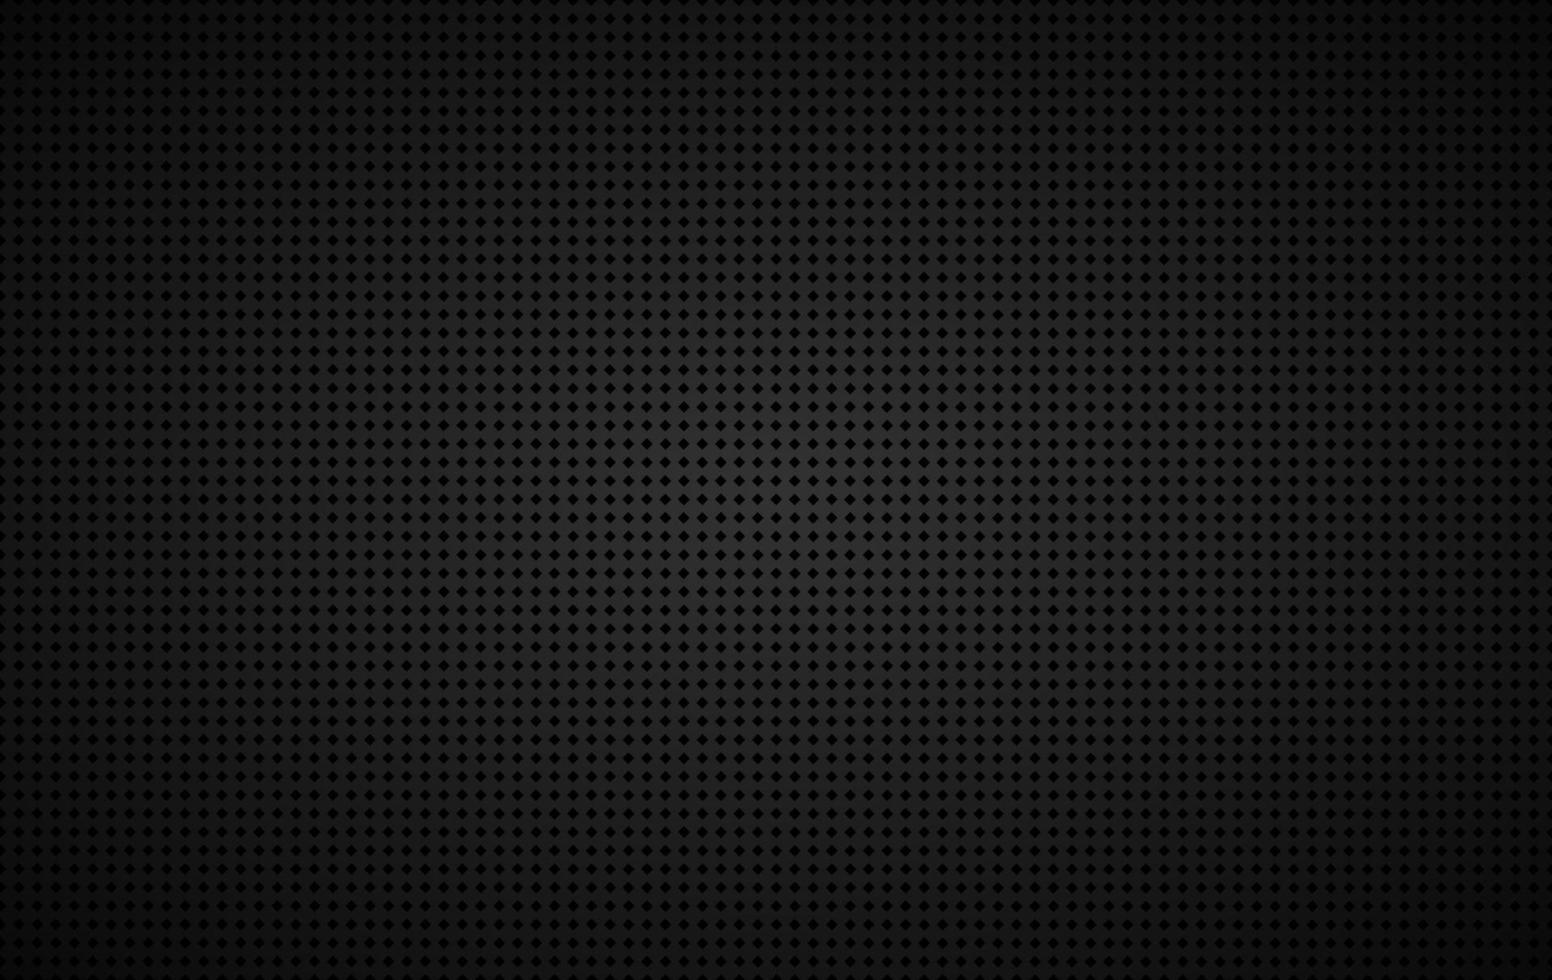 Geometric perforated square background, abstract black metallic square background, carbon kevlar texture, simple vector illustration